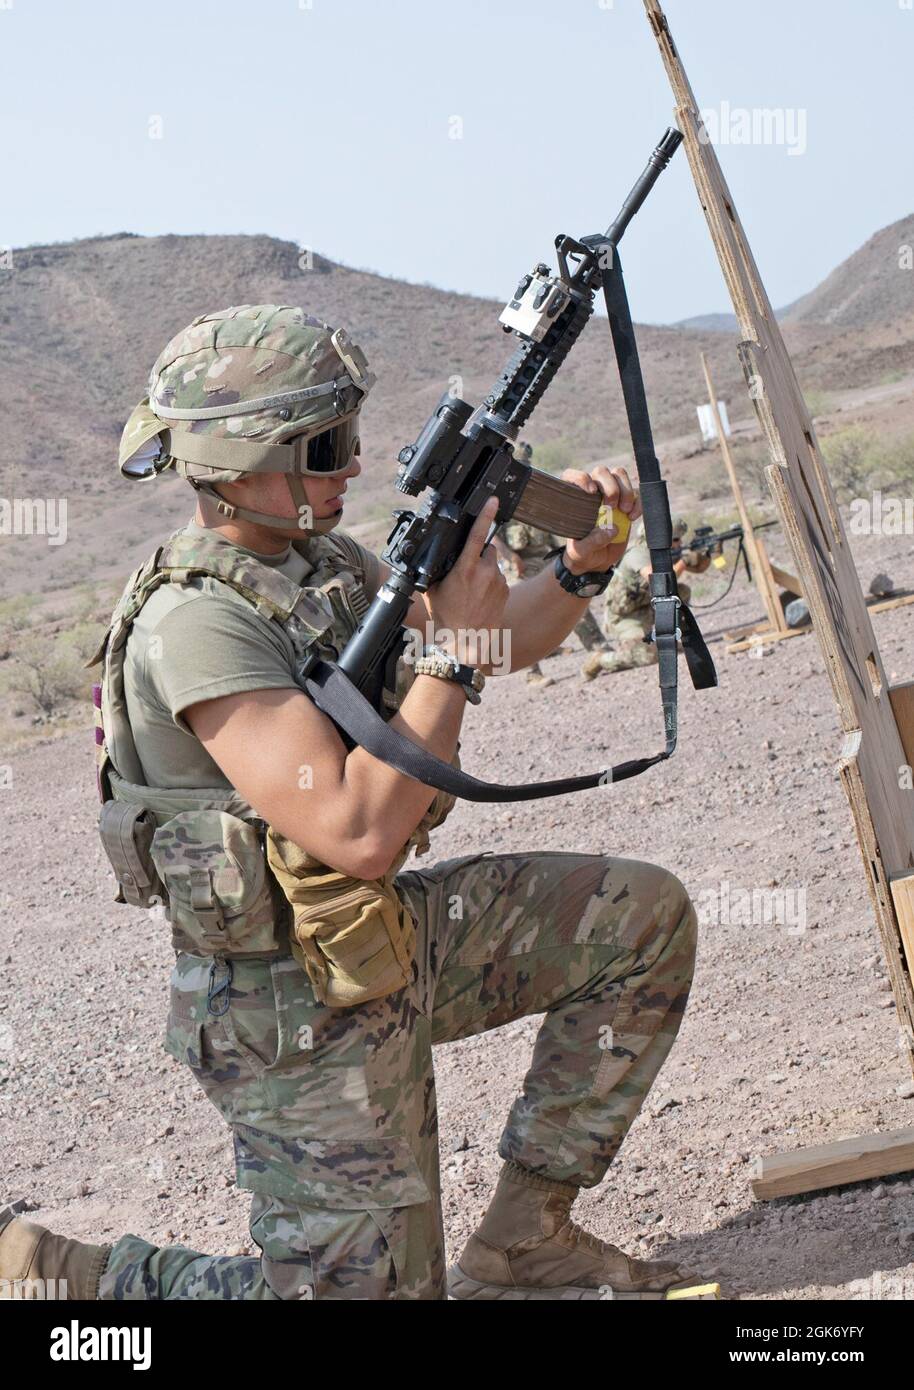 ARTA, Djibouti (August 19, 2021) U.S. Army Spc. Simon Galeano, from Norwalk, Conn., 1-102nd Infantry Regiment (Mountain), Task Force Iron Gray, Combined Joint Task Force – Horn of Africa (CJTF-HOA), reloads a magazine into his M4 rifle during a live-fire exercise at the Djiboutian Range Complex, Djibouti, Aug. 19, 2021. Galeano is currently stationed at Camp Lemonnier, Djibouti (CLDJ), which serves as an expeditionary base for U.S. military forces providing support to ships, aircraft and personnel that ensure security throughout Europe, Africa and Southwest Asia. CLDJ enables maritime and comb Stock Photo